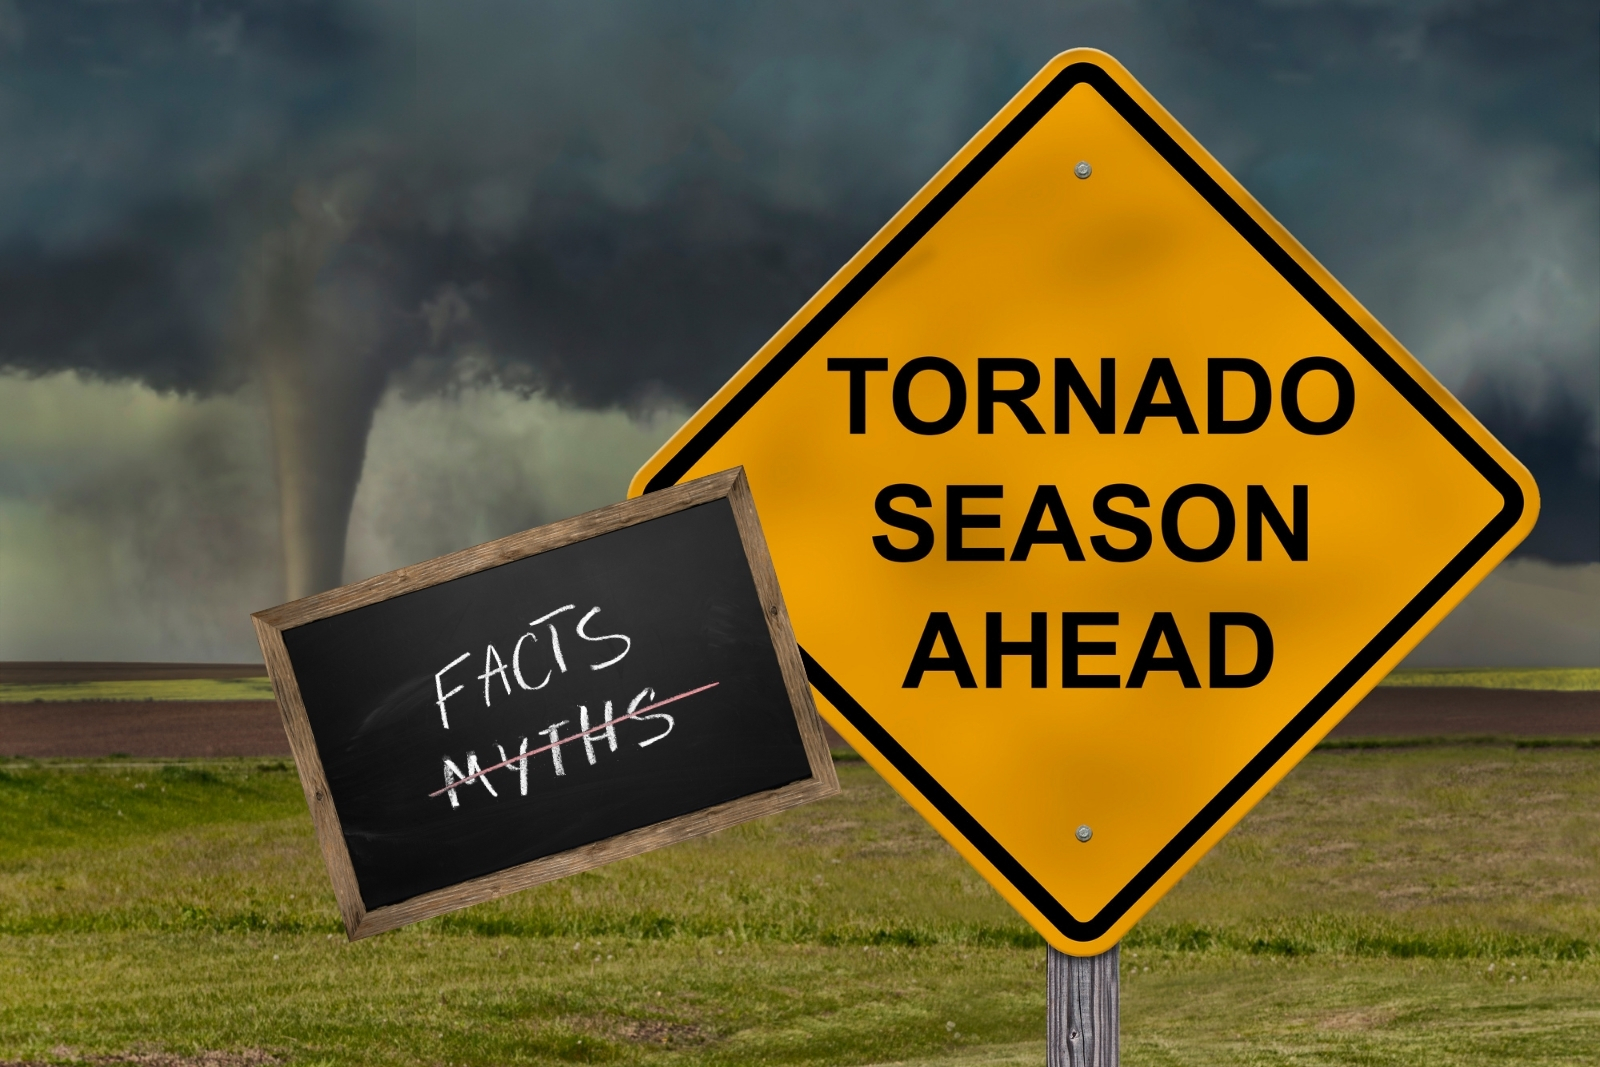 Prepare for Severe Weather in South Dakota &#8211; Don&#8217;t Believe These 5 Common Tornado Myths